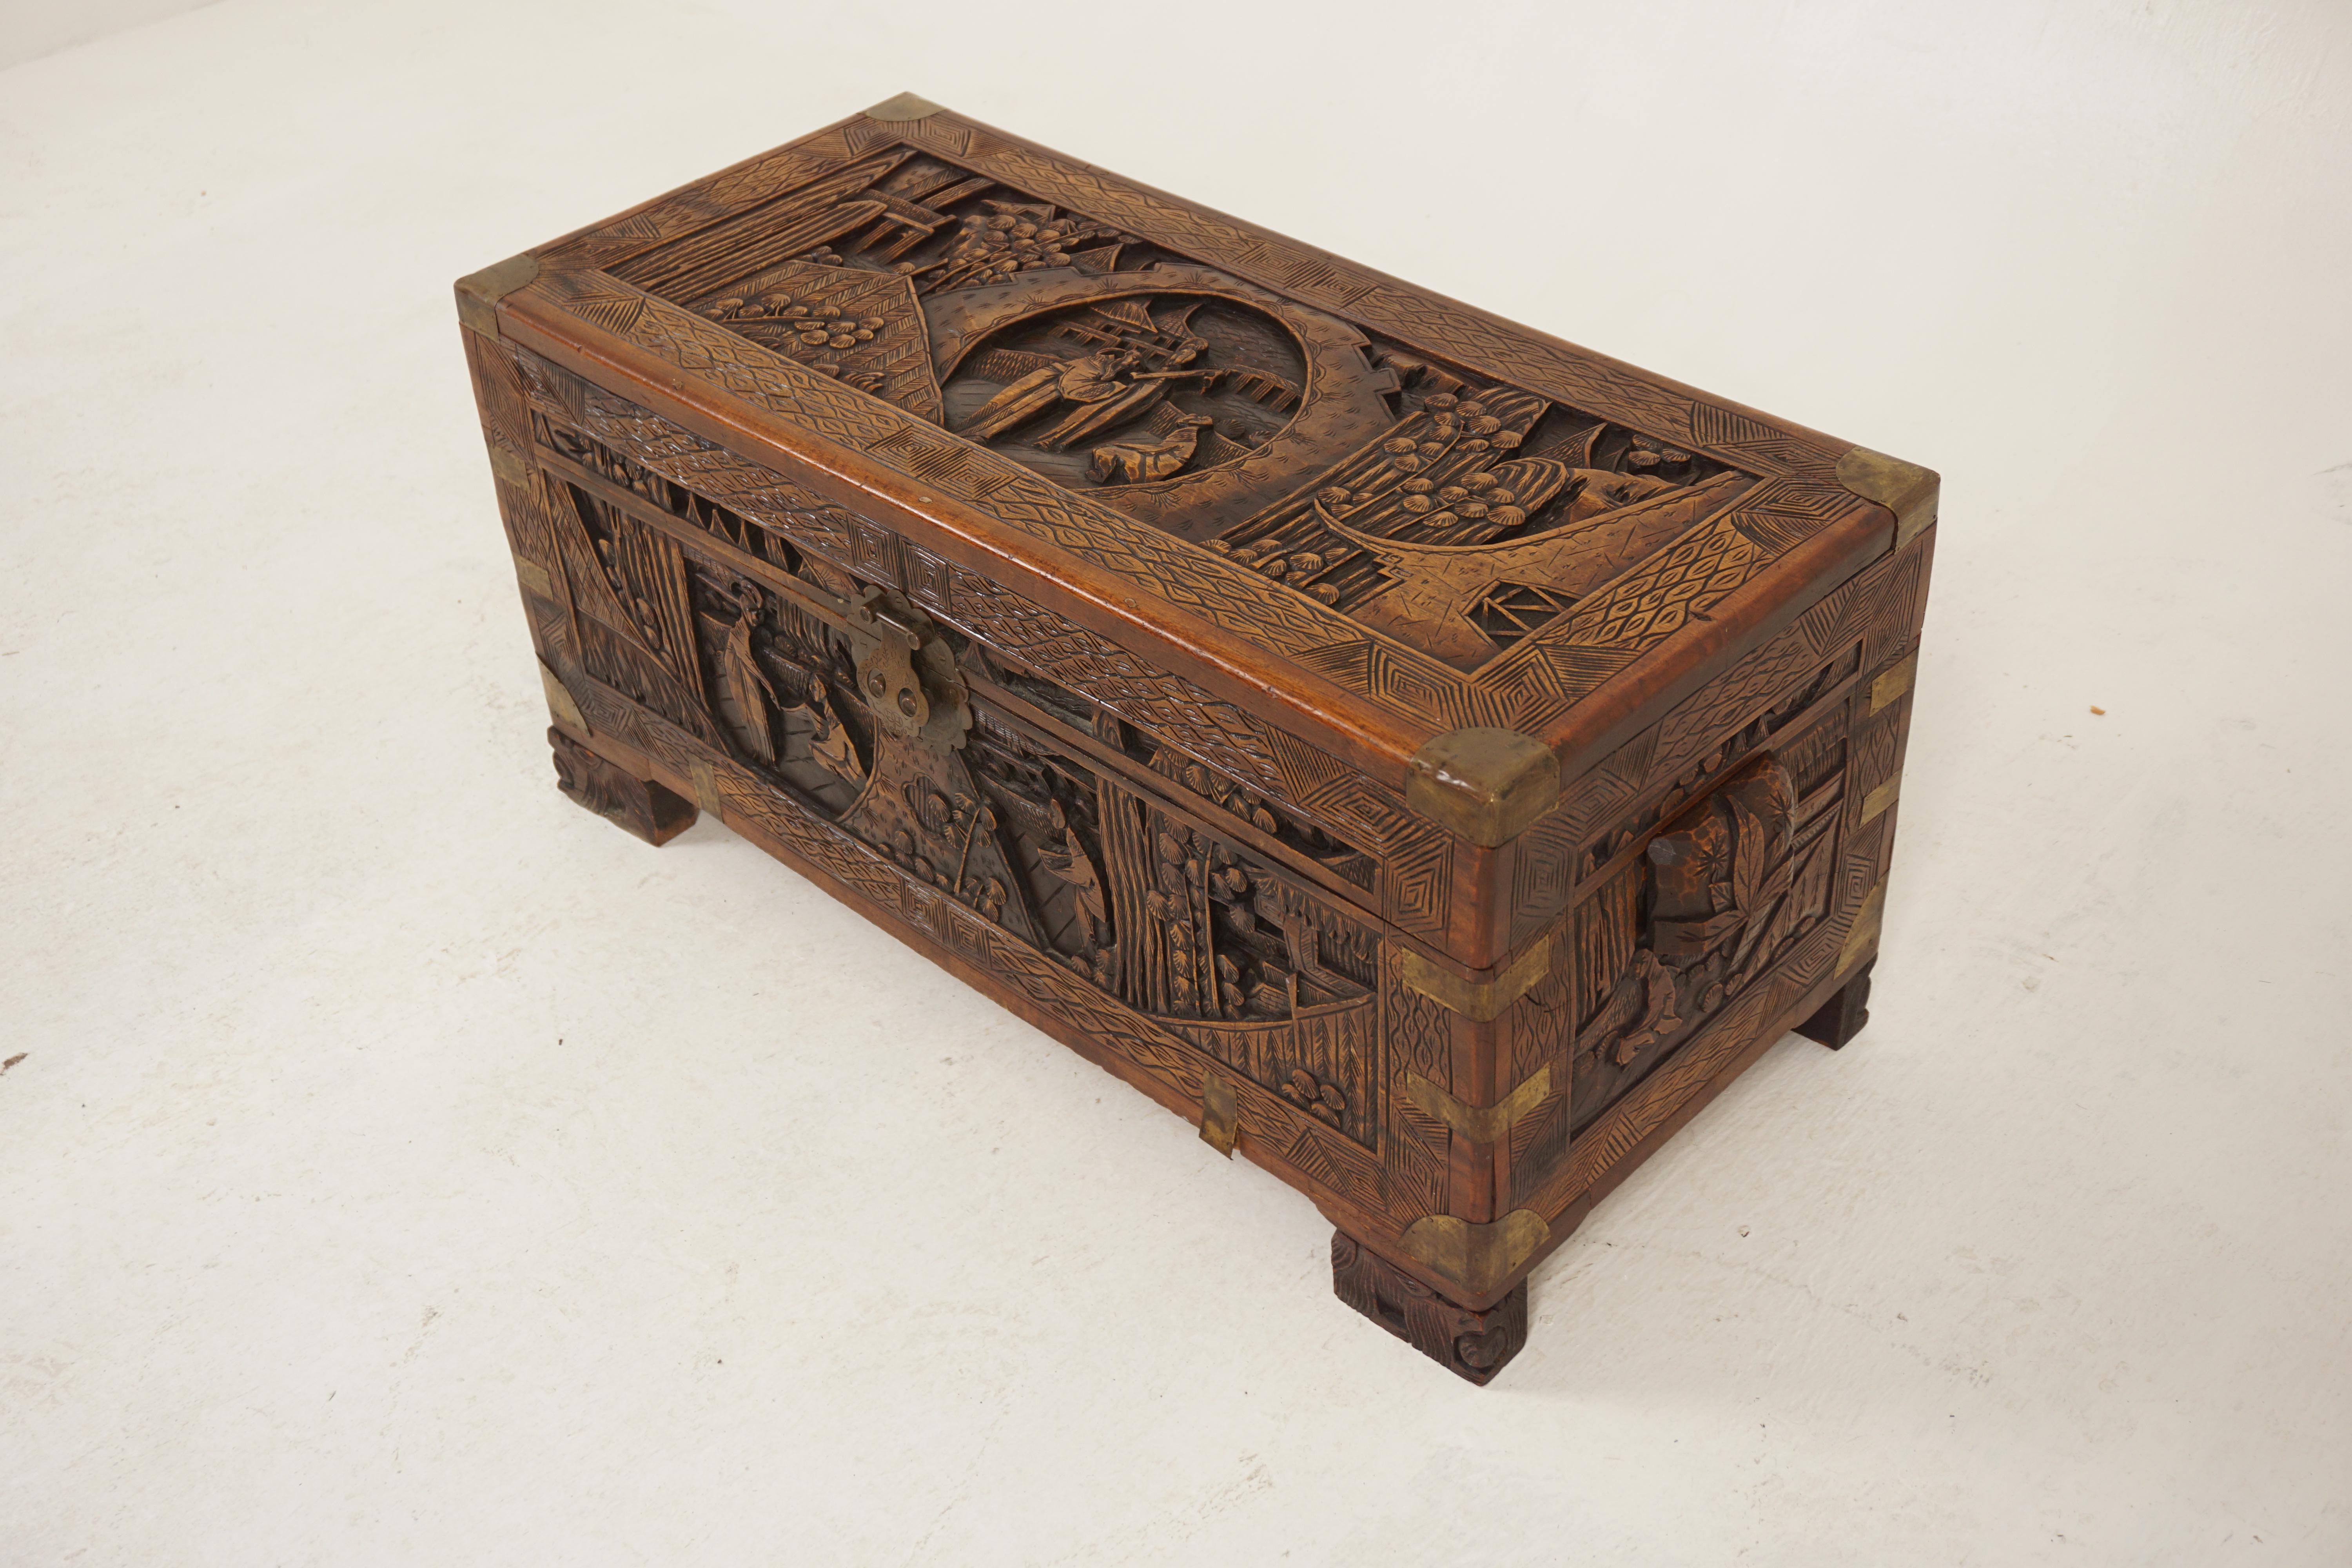 Antique Chinese Finely Carved Camphor Chest, China 1920, H1185

Solid camphor 
Original finish
Freestanding chest having outstanding quality carved panels on all sides
Two cup carved handles on the side
Lift up lid with original brass lock but no